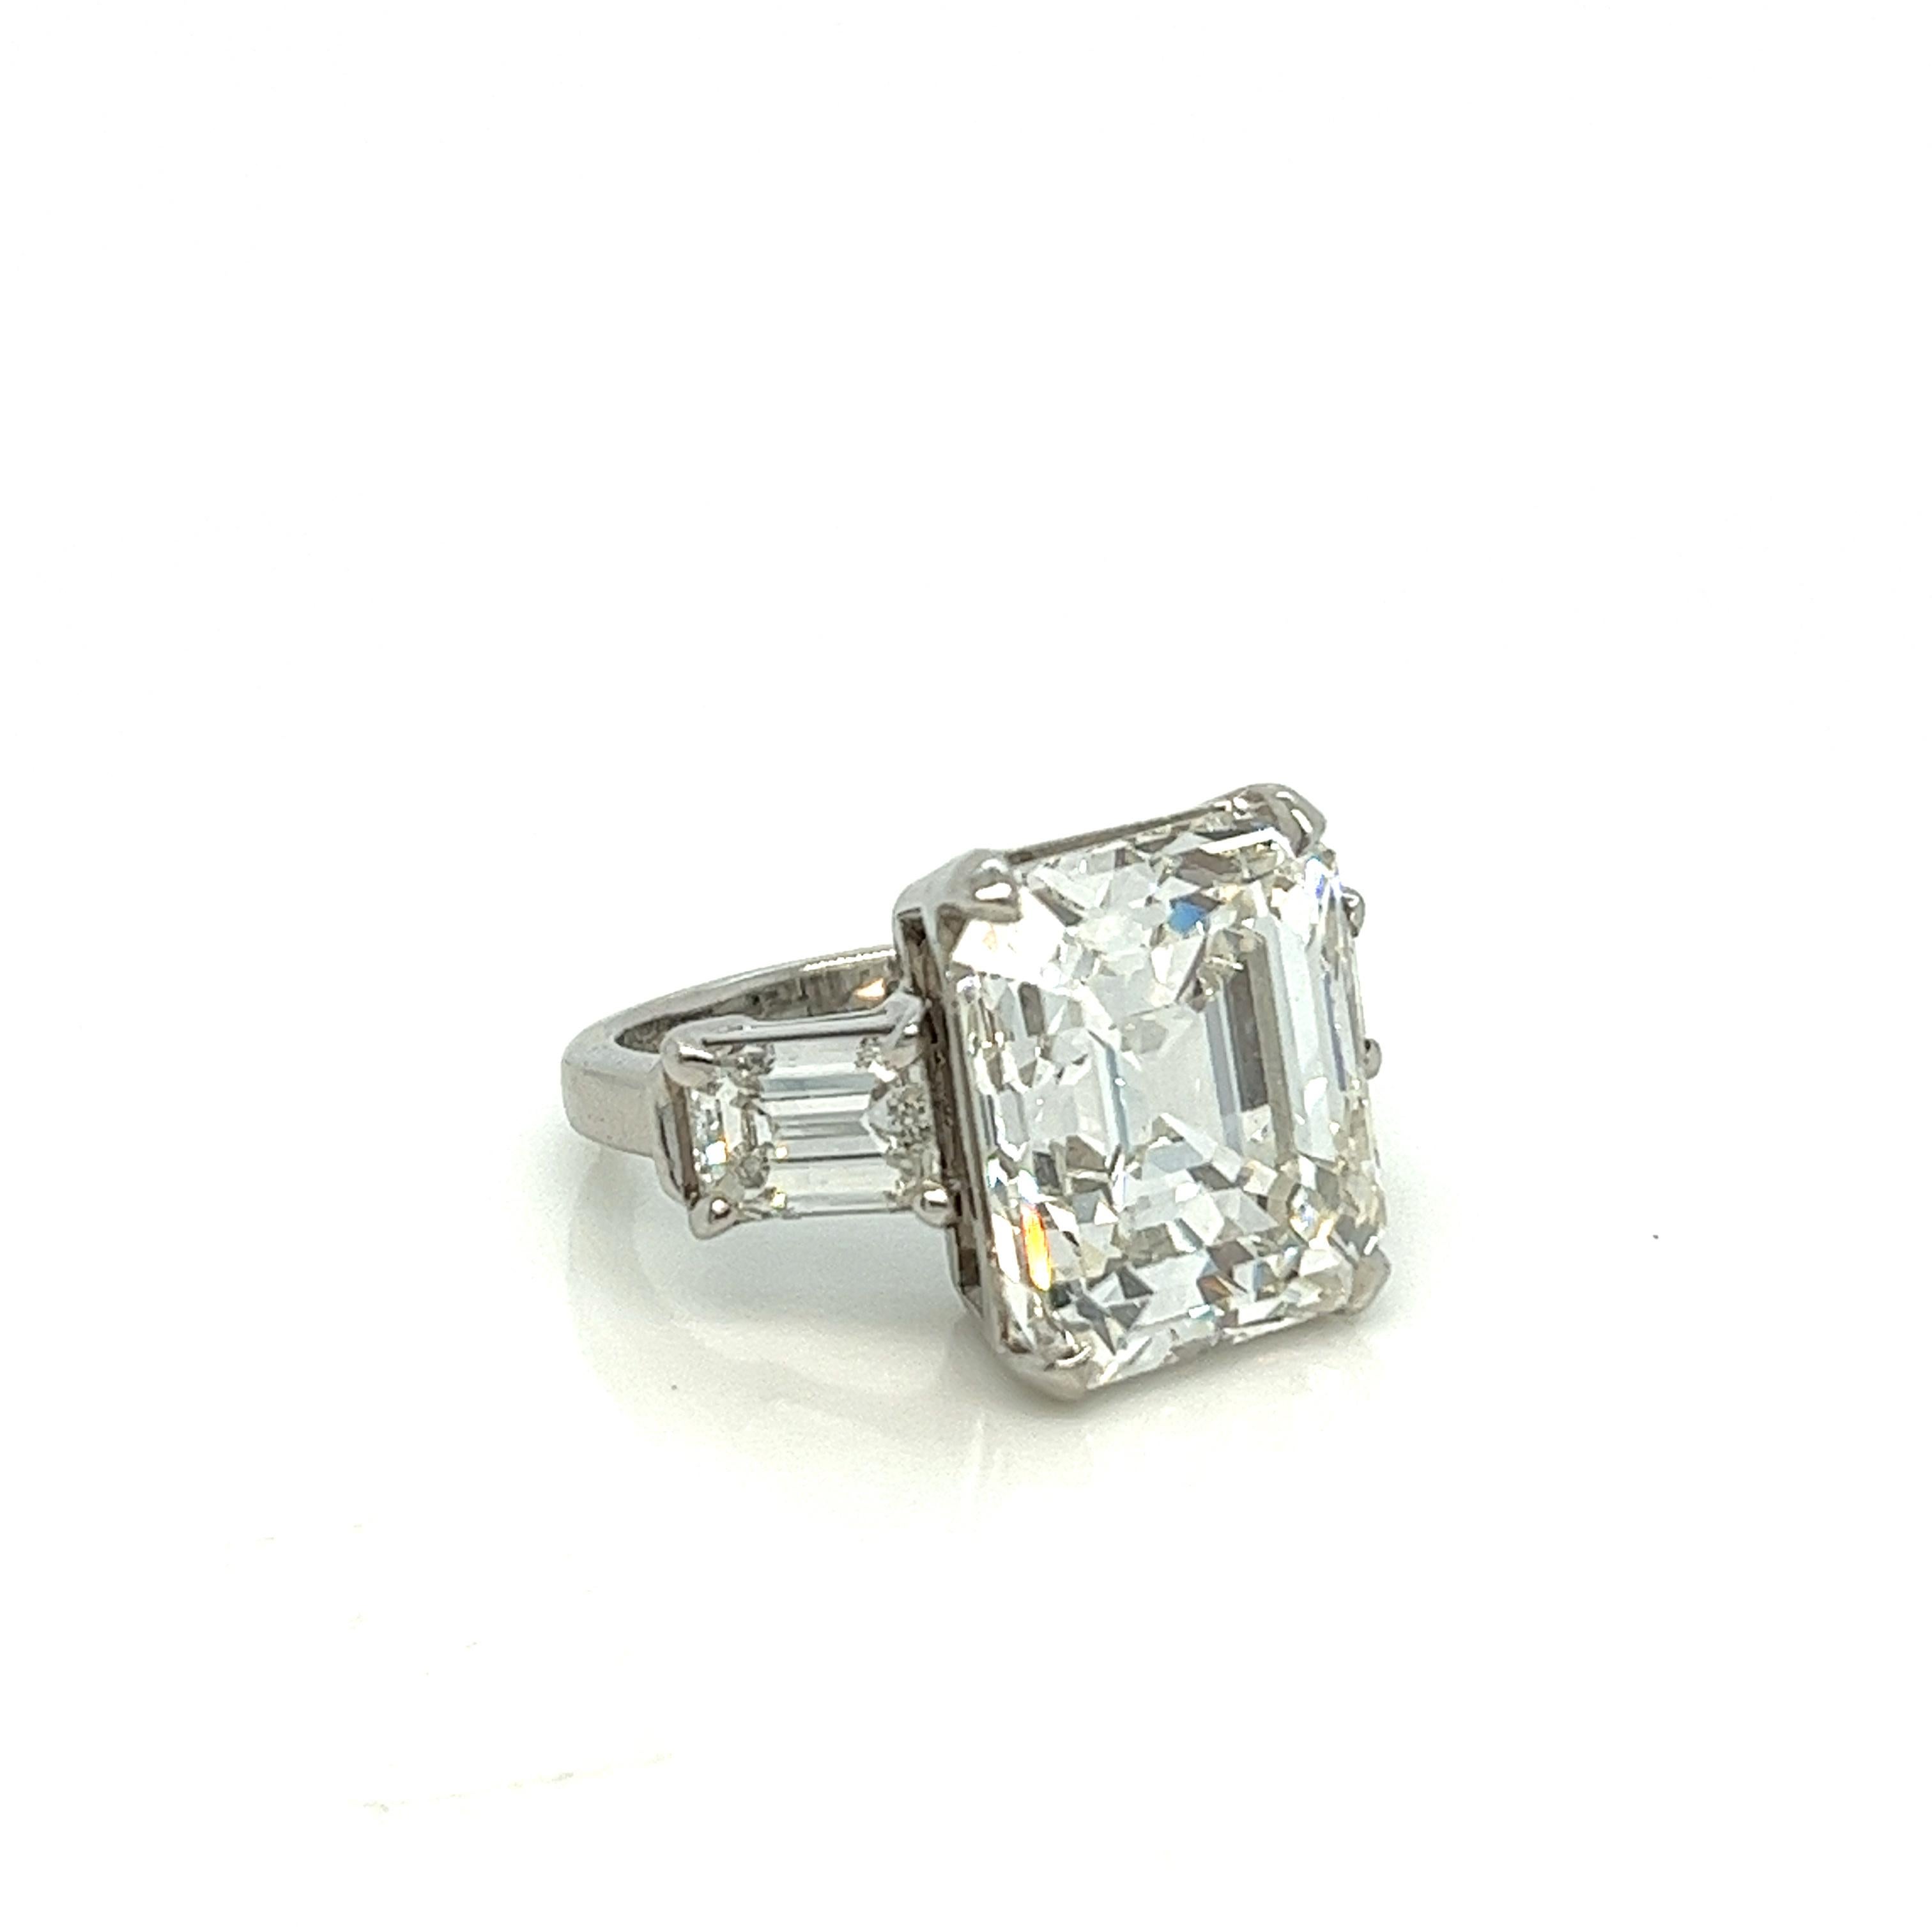 This 10.58 carat antique emerald cut engagement ring is what dreams are made of. The center, a true antique step cut, with her open culet, is stunningly crisp and bright - it's not everyday that you come across a center stone like this. Graded by